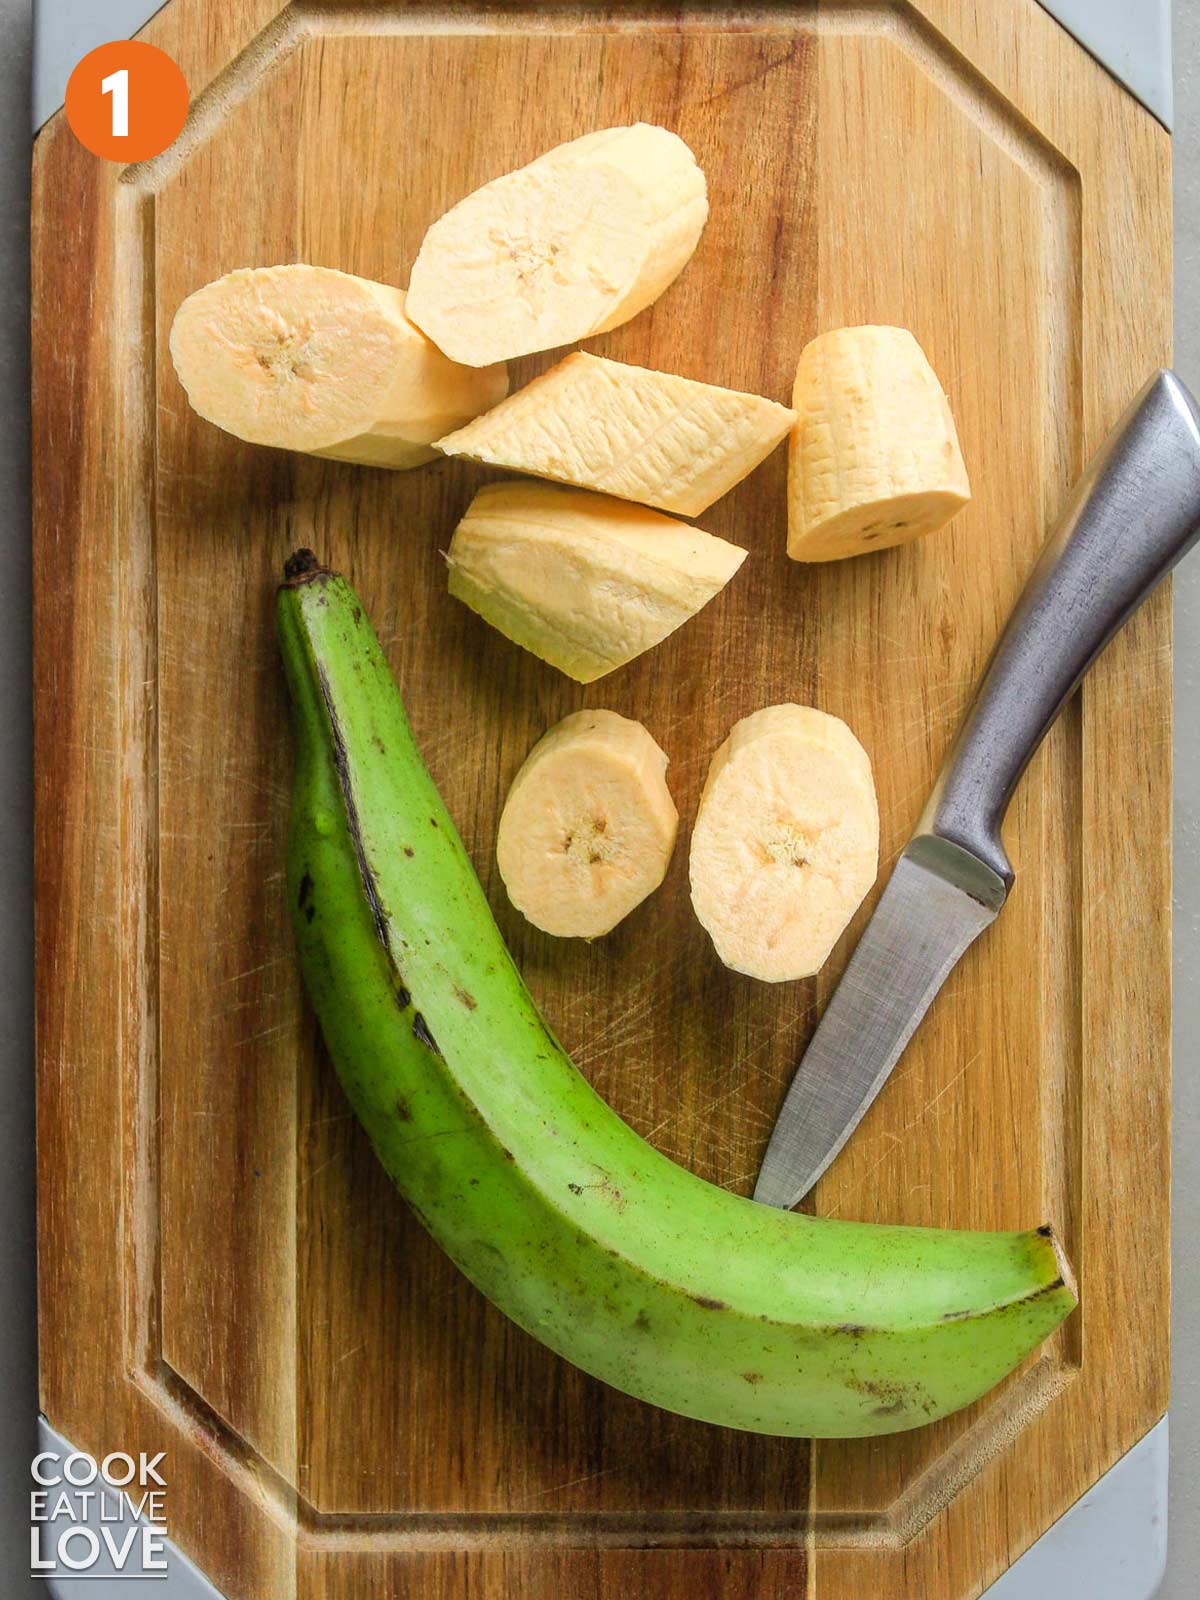 Plantains cut into one inch pieces on a cutting board with a knife and a whole plantain.